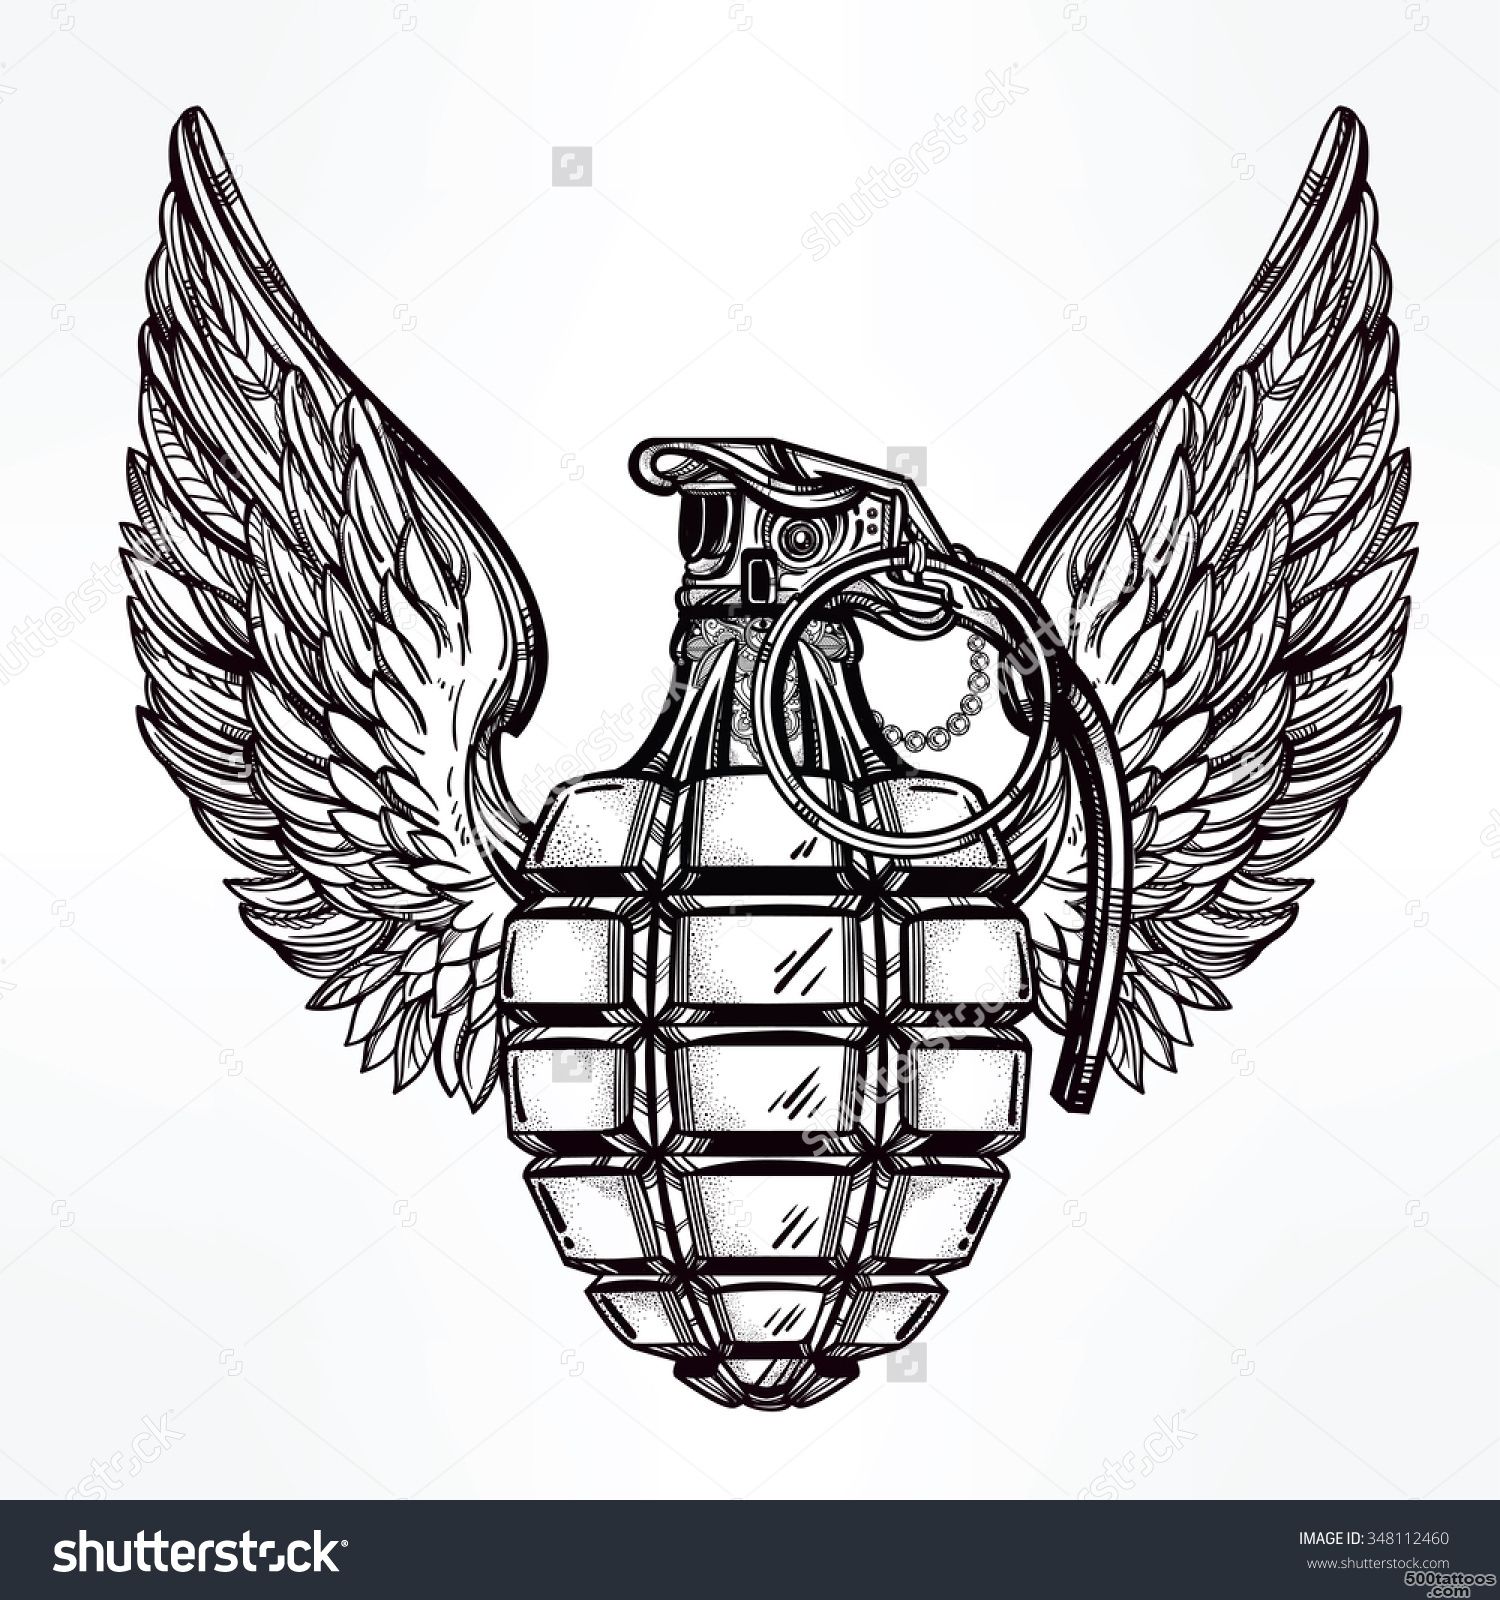 stock vector hand drawn retro hand grenade drawing with wings in ..._22